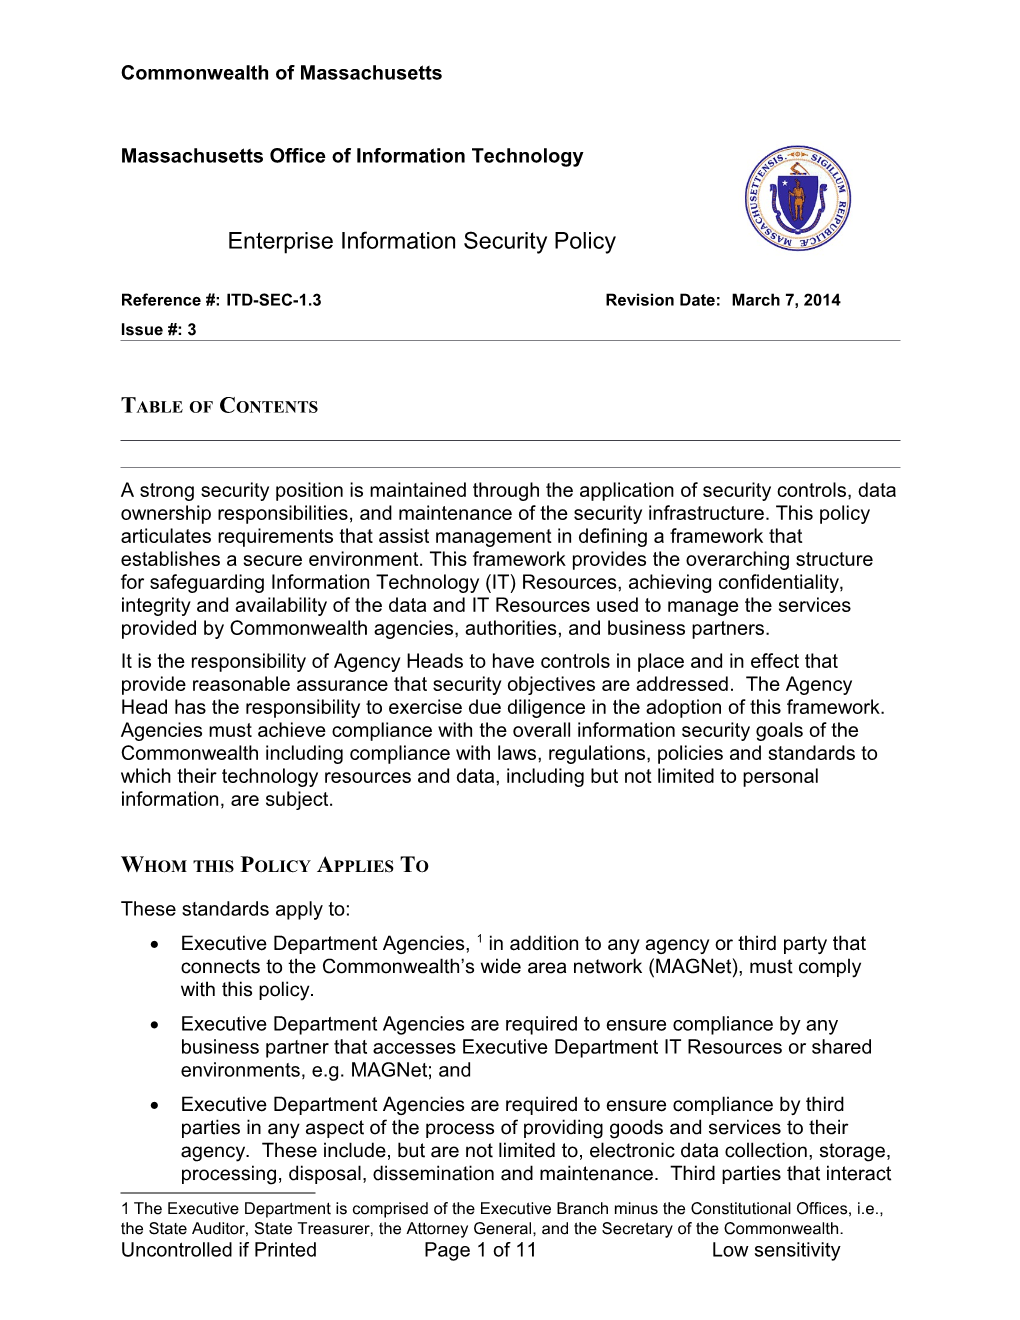 Enterprise Information Security Policy